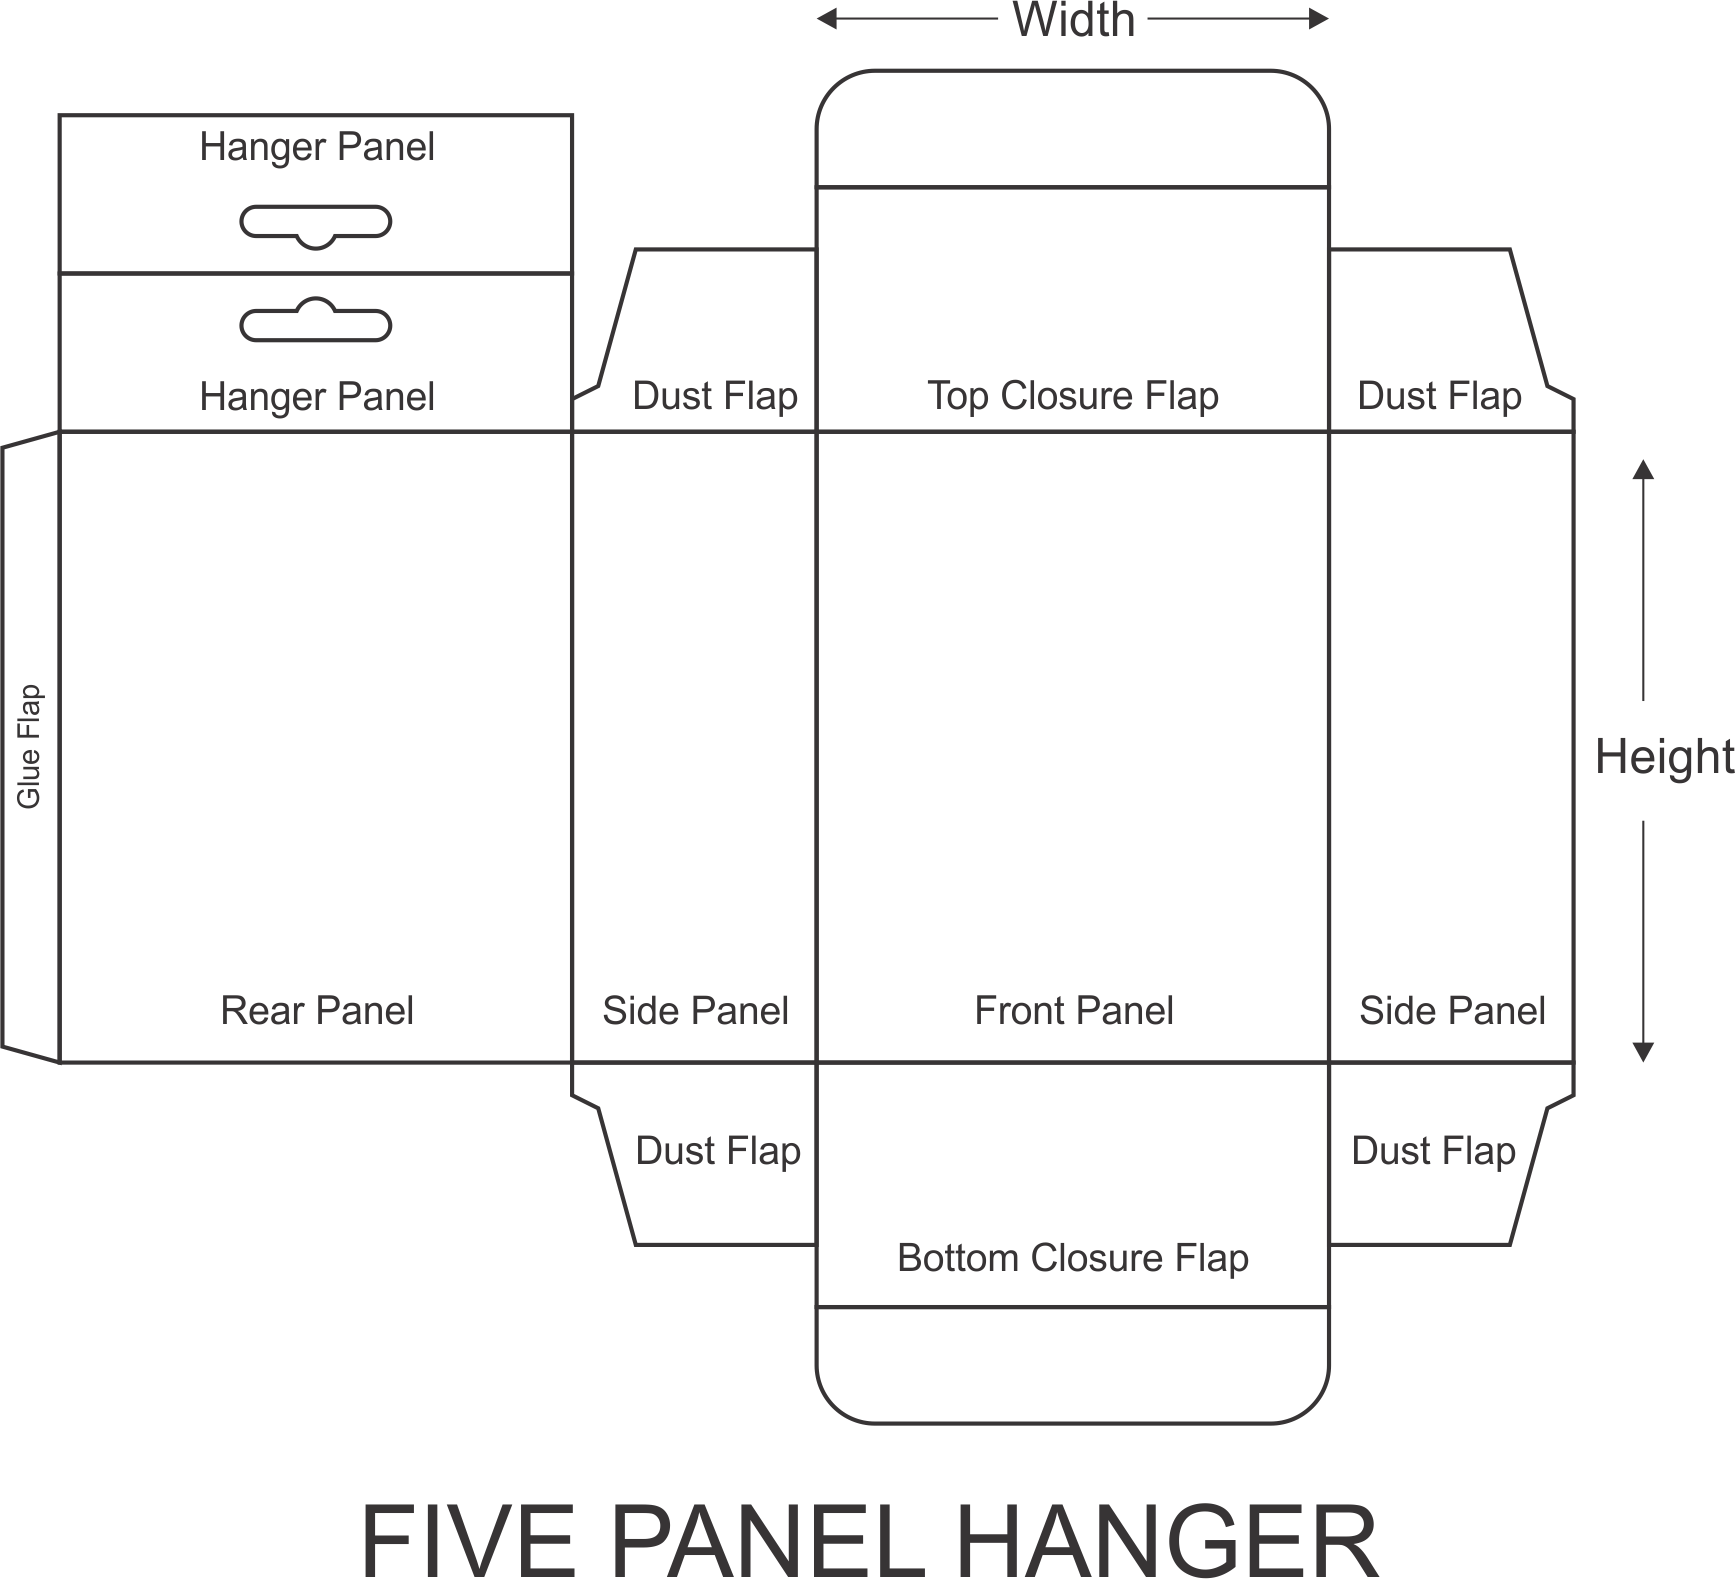 Five Panel Hanger Boxes have an prolonged panel on top with a punch hole allowing it to be one of the packaging that can be hanged on walls, cabinets etc. 